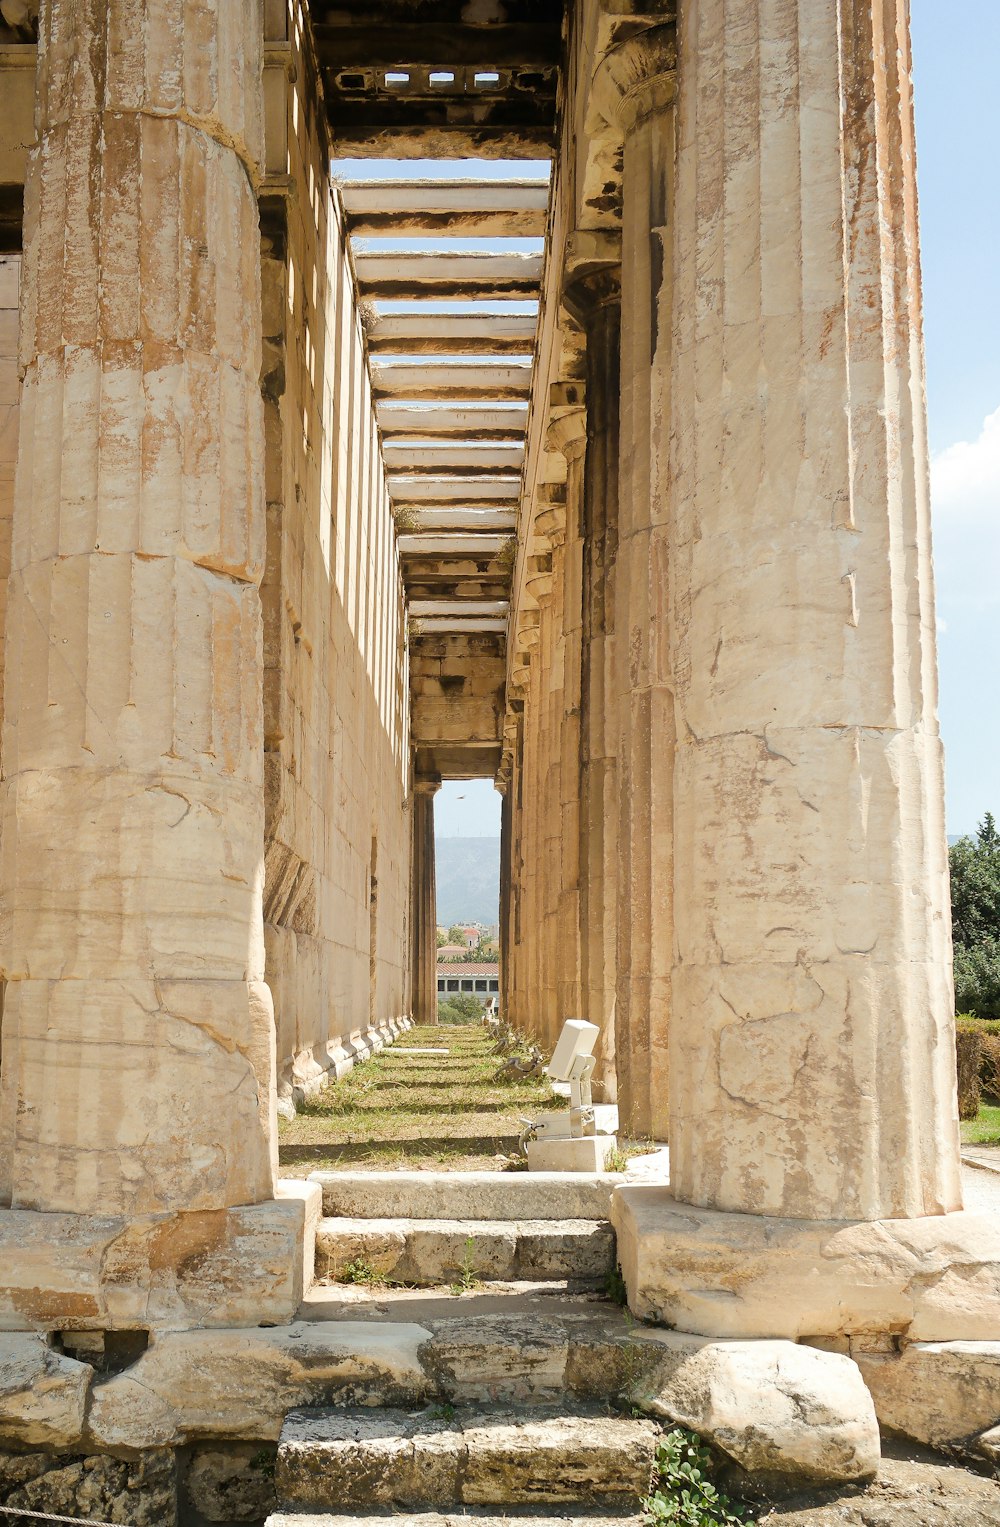 a row of stone pillars with steps leading up to them